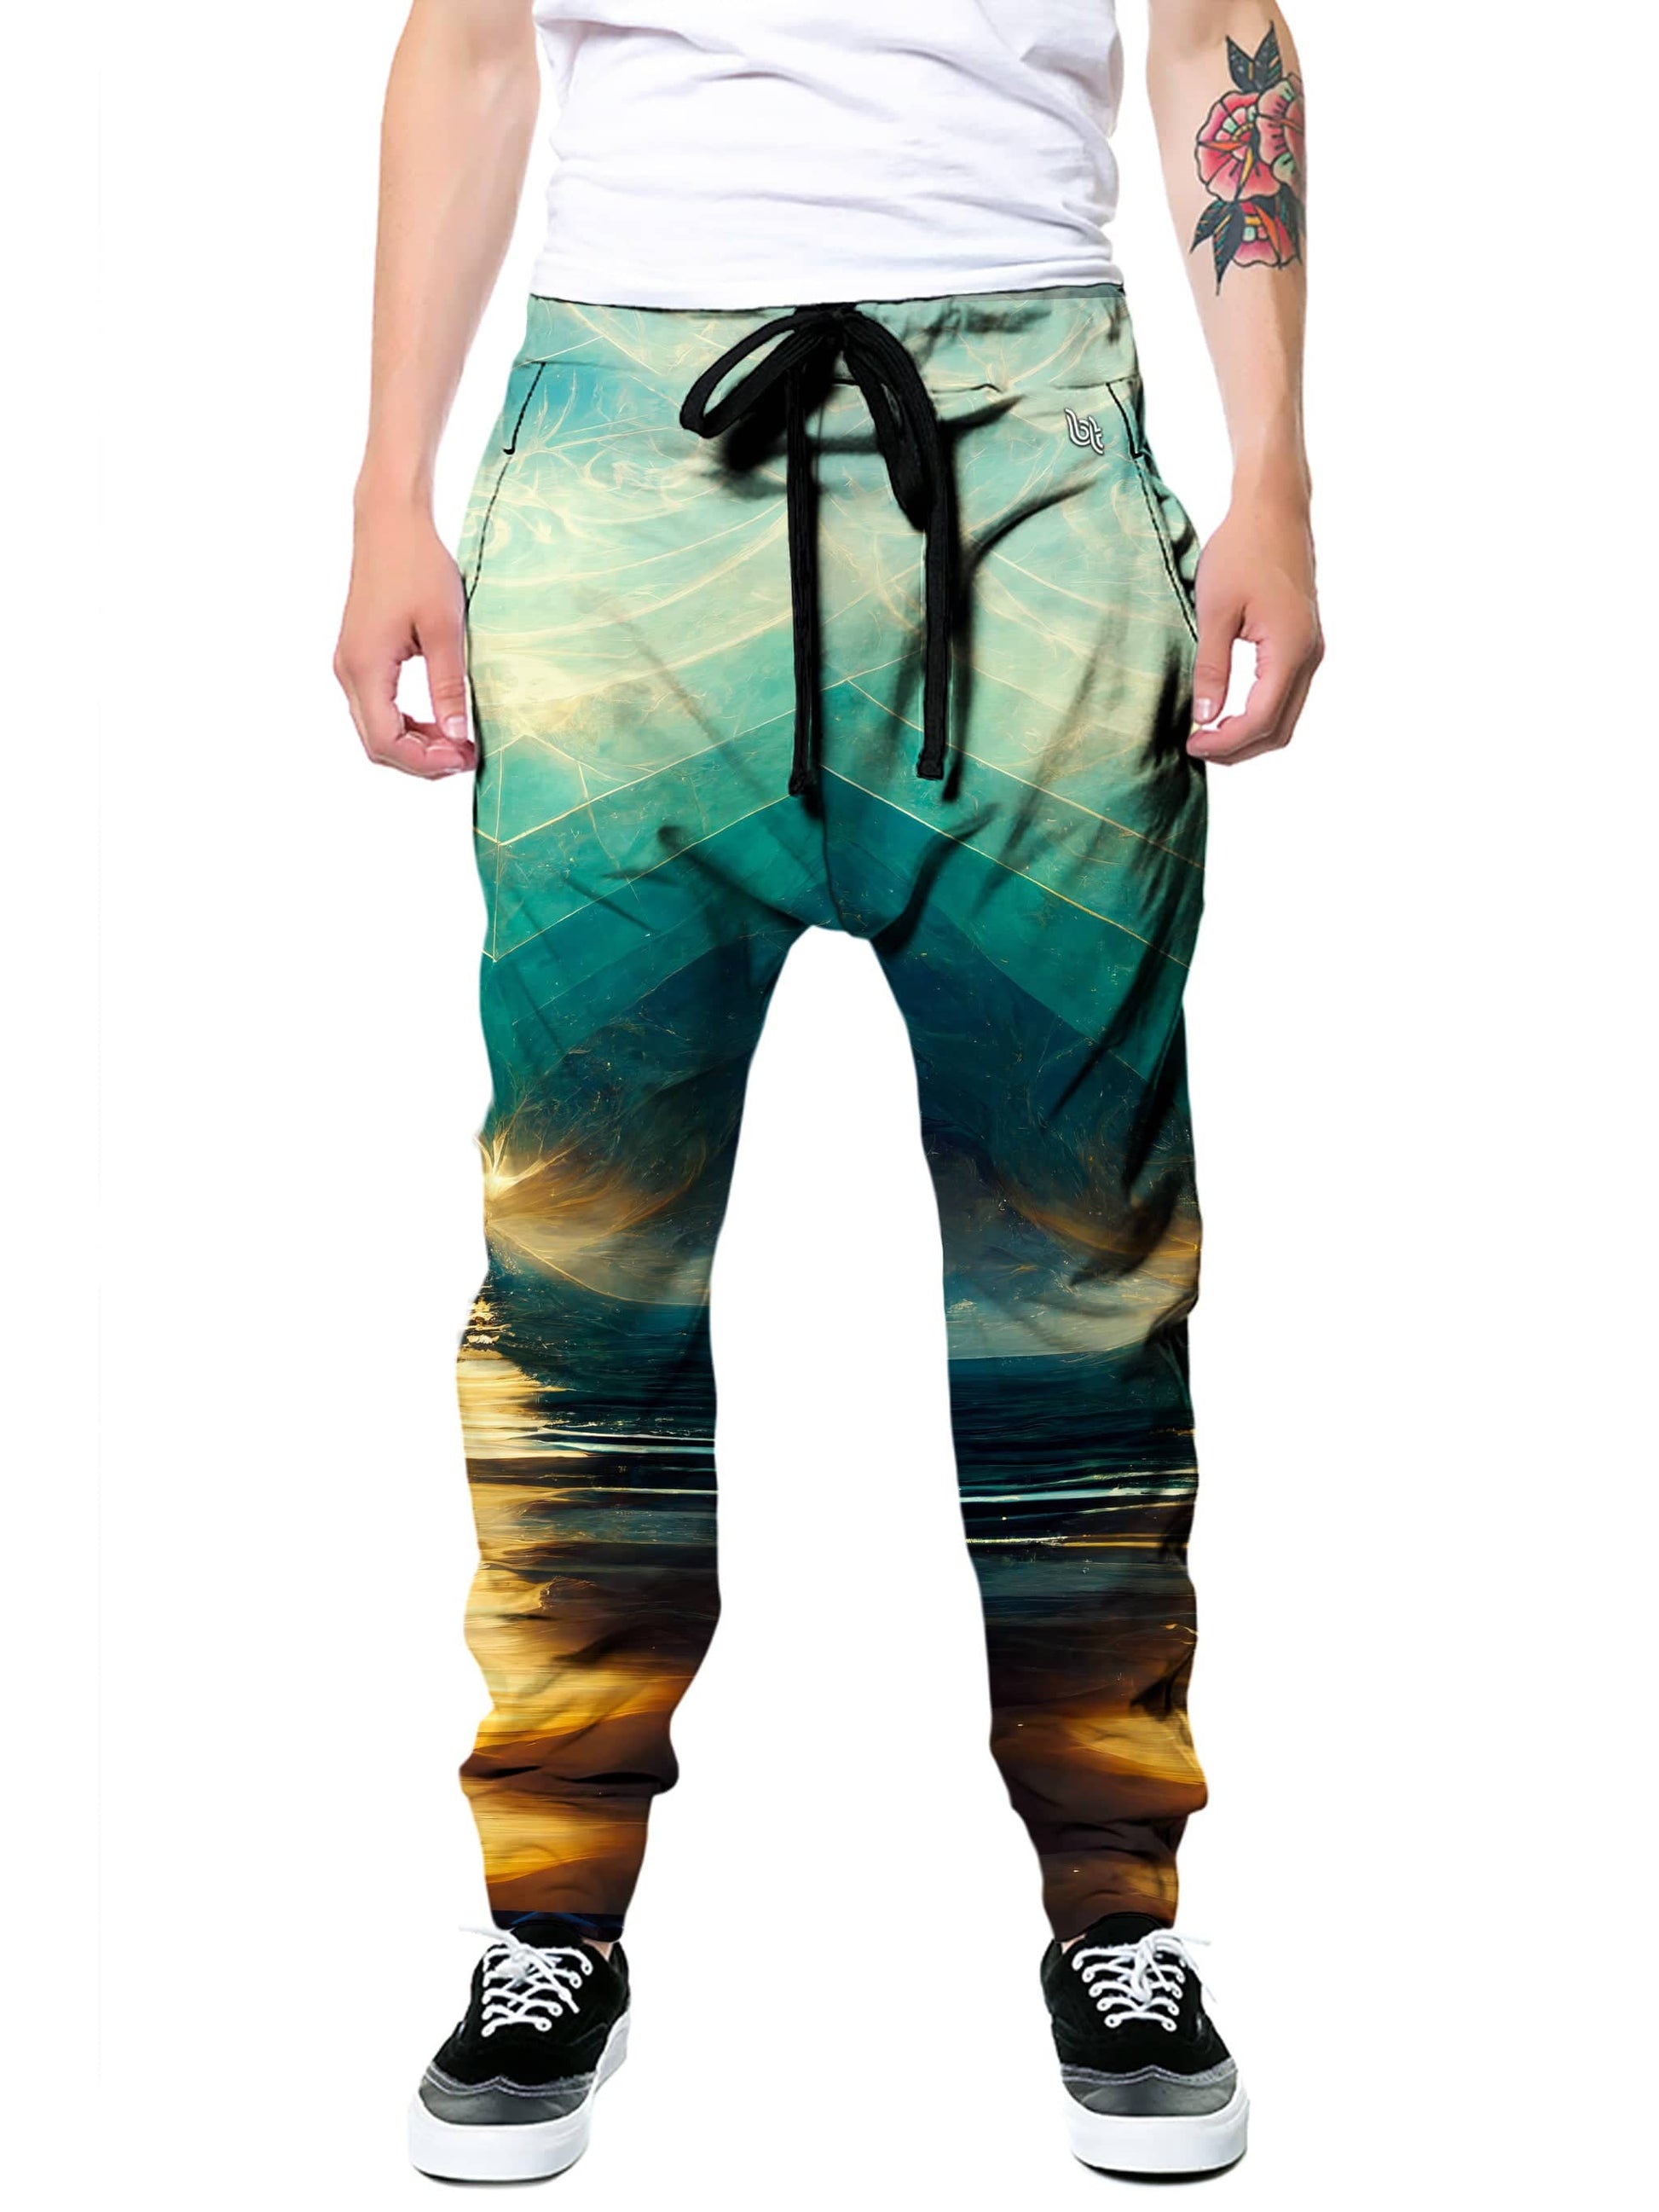 Bewildered Discovery Joggers, Gratefully Dyed, | iEDM